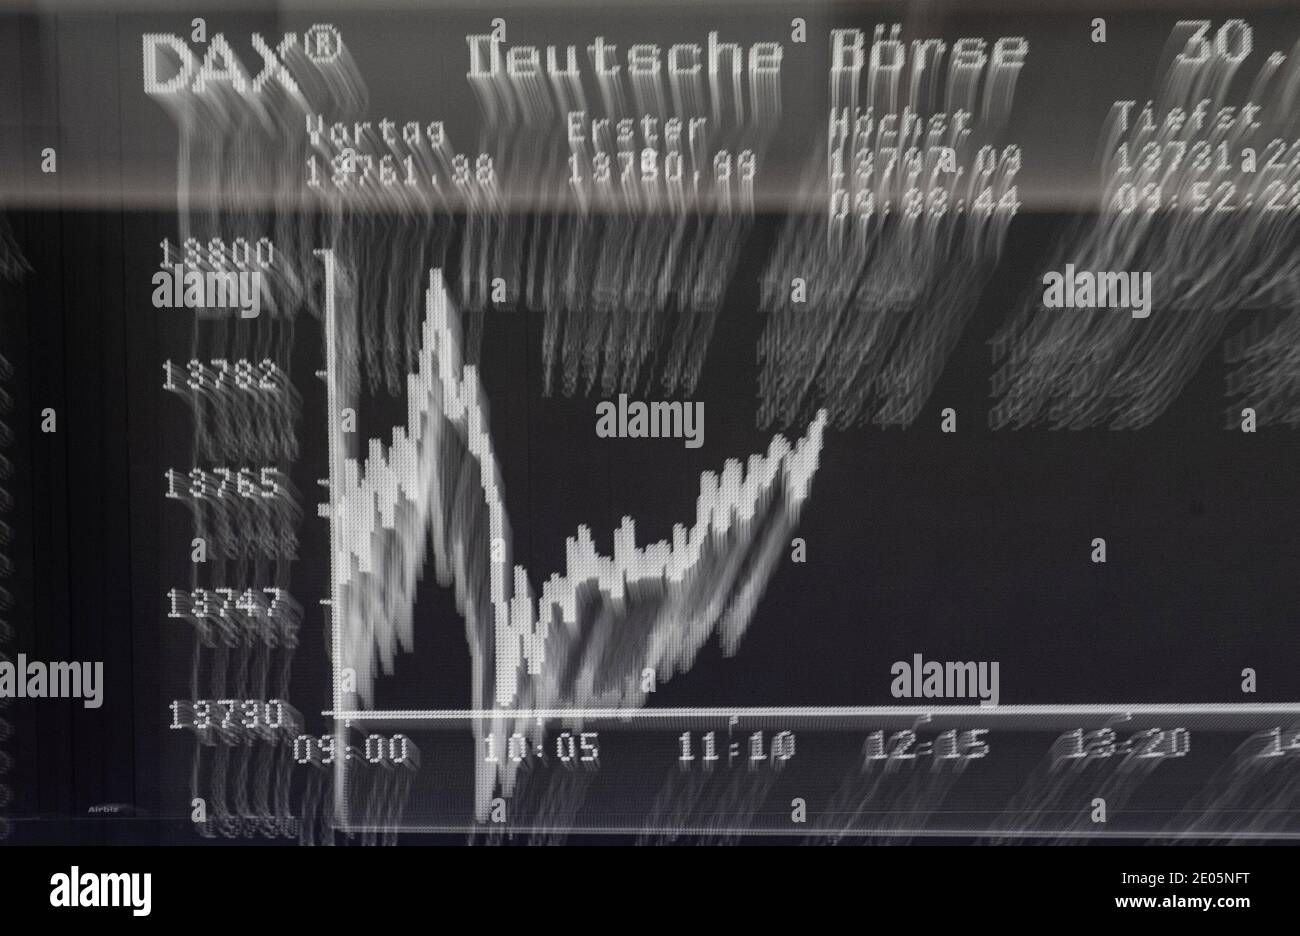 30 December Hessen Frankfurt Main The Dax Curve On The Stock Exchange Points Upwards On The Last Trading Day Of The Year Photo With Zoom Effect Due To The Corona Pandemic Stock